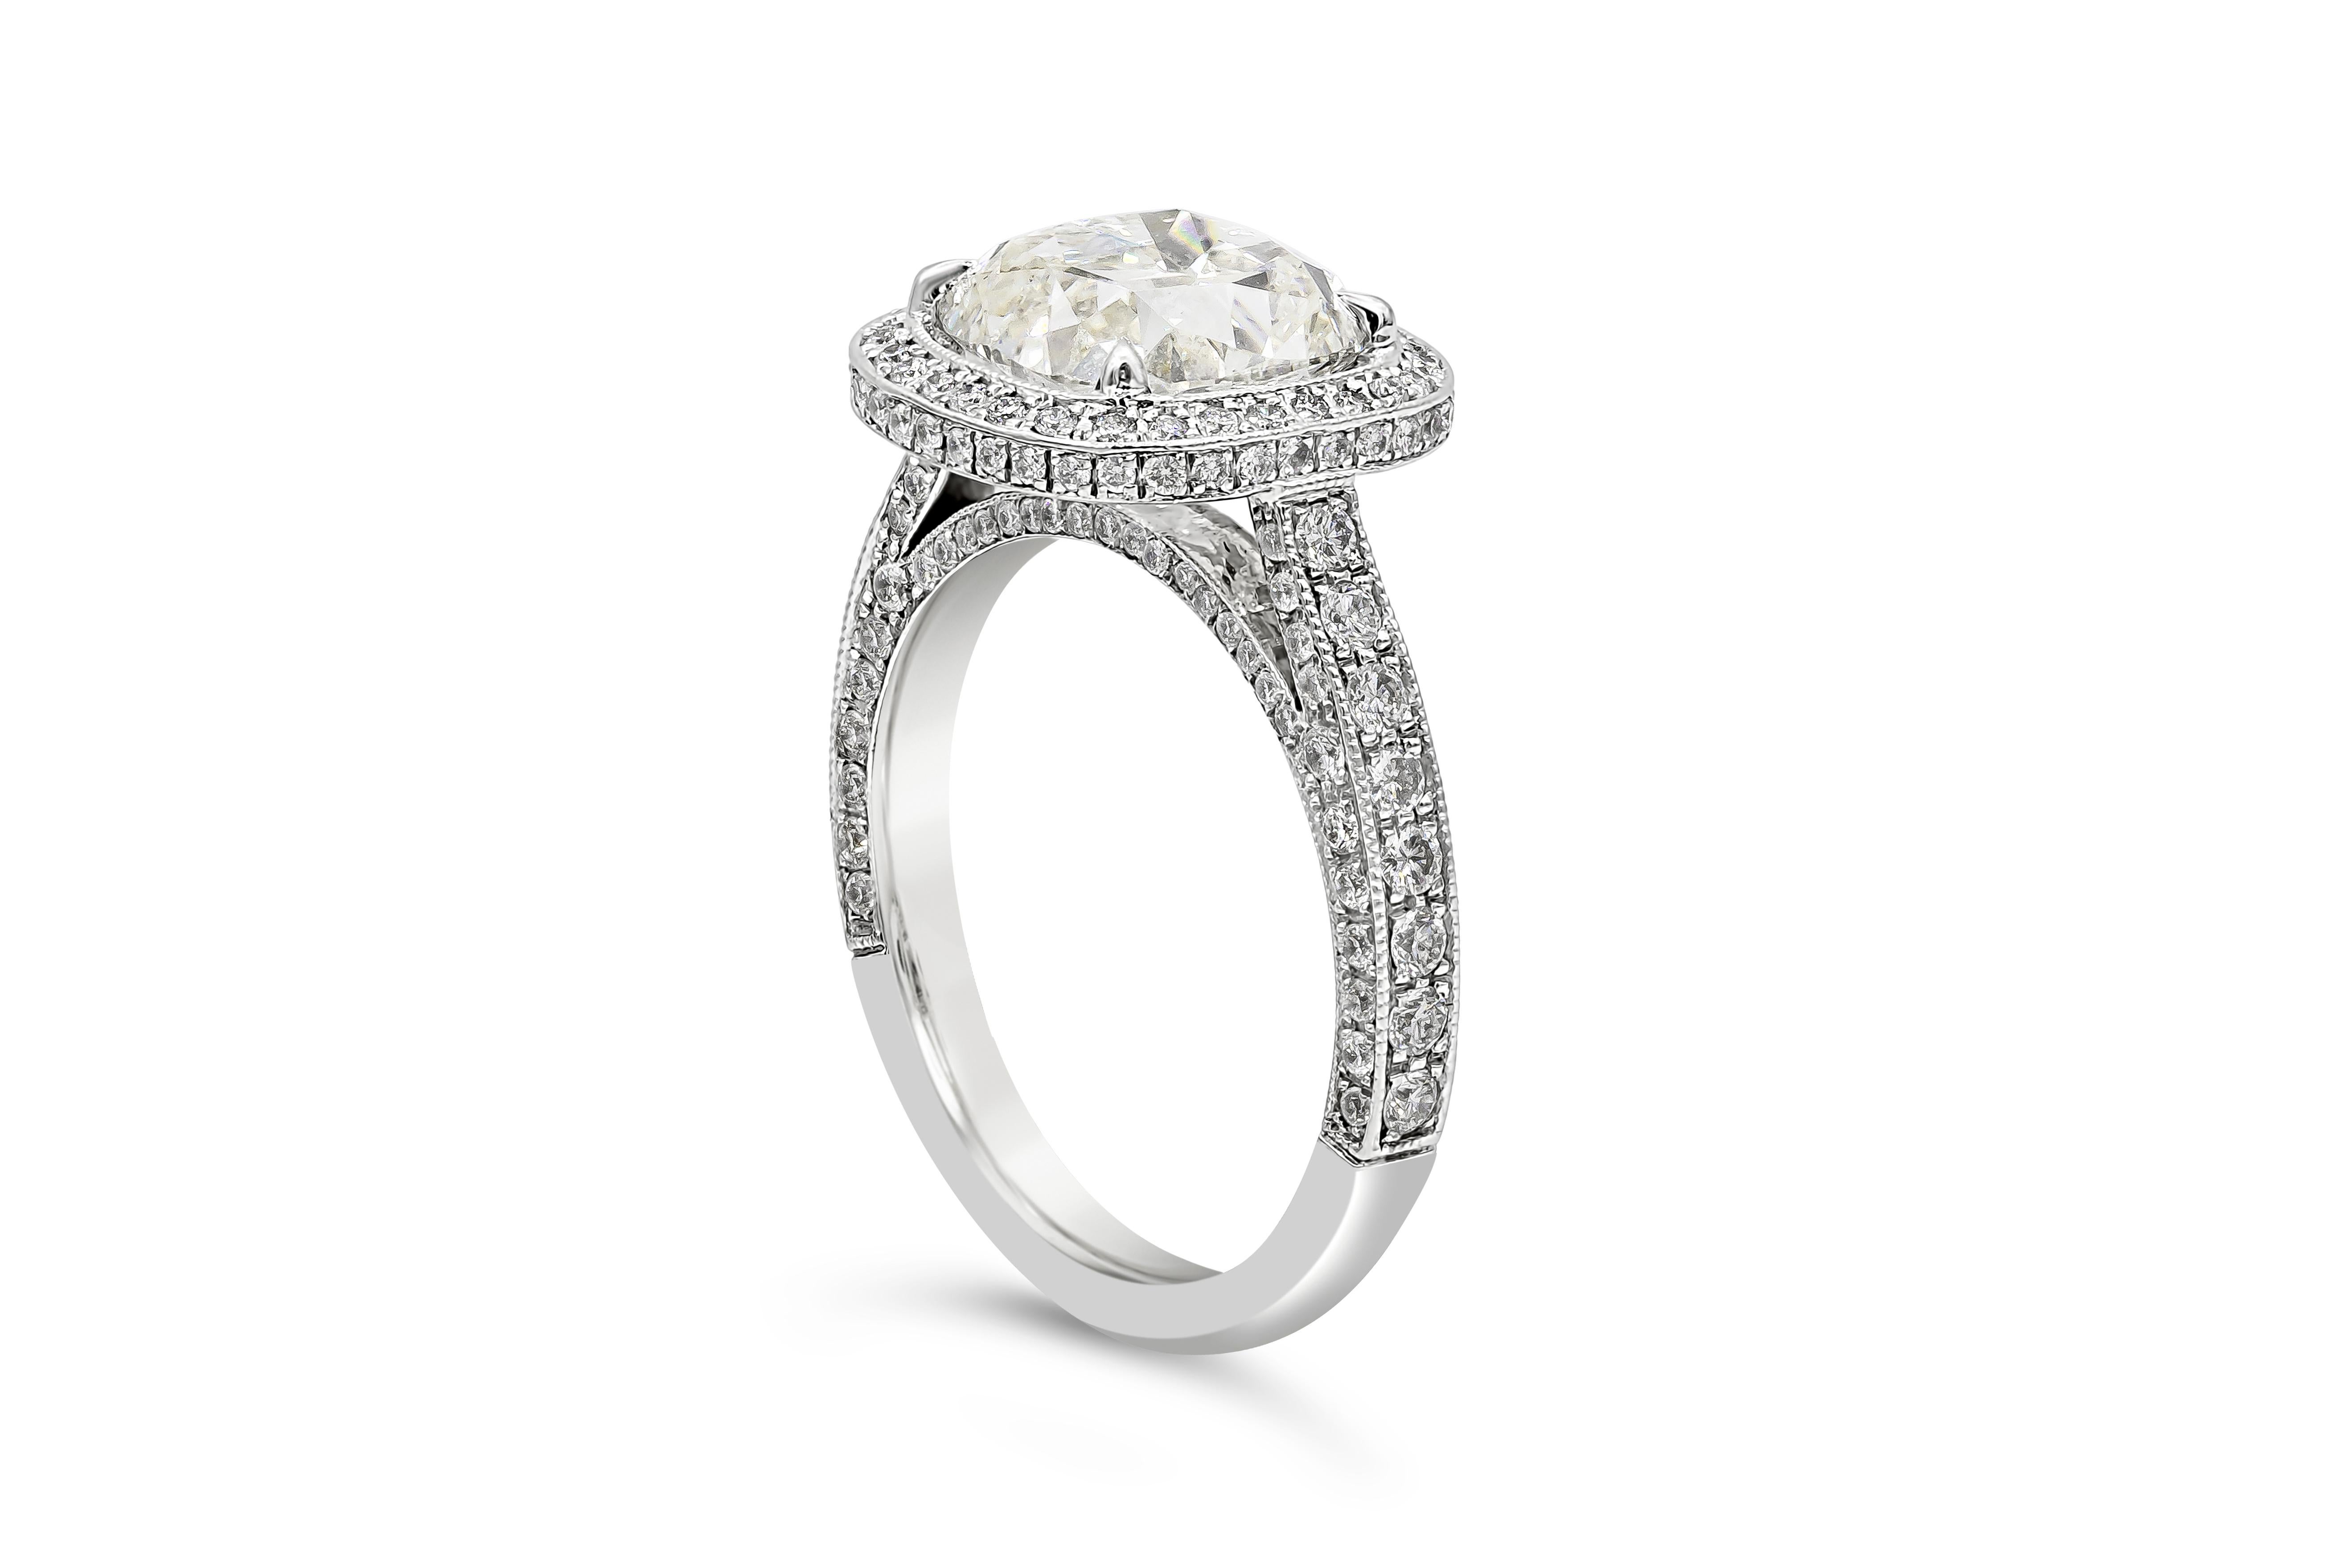 A well-crafted engagement ring style showcasing a 3.02 carats cushion cut diamond certified by GIA as H color, VS2 in clarity, set in an elegant floating halo bezel setting accented with round diamonds. Shank is diamond encrusted made in polished